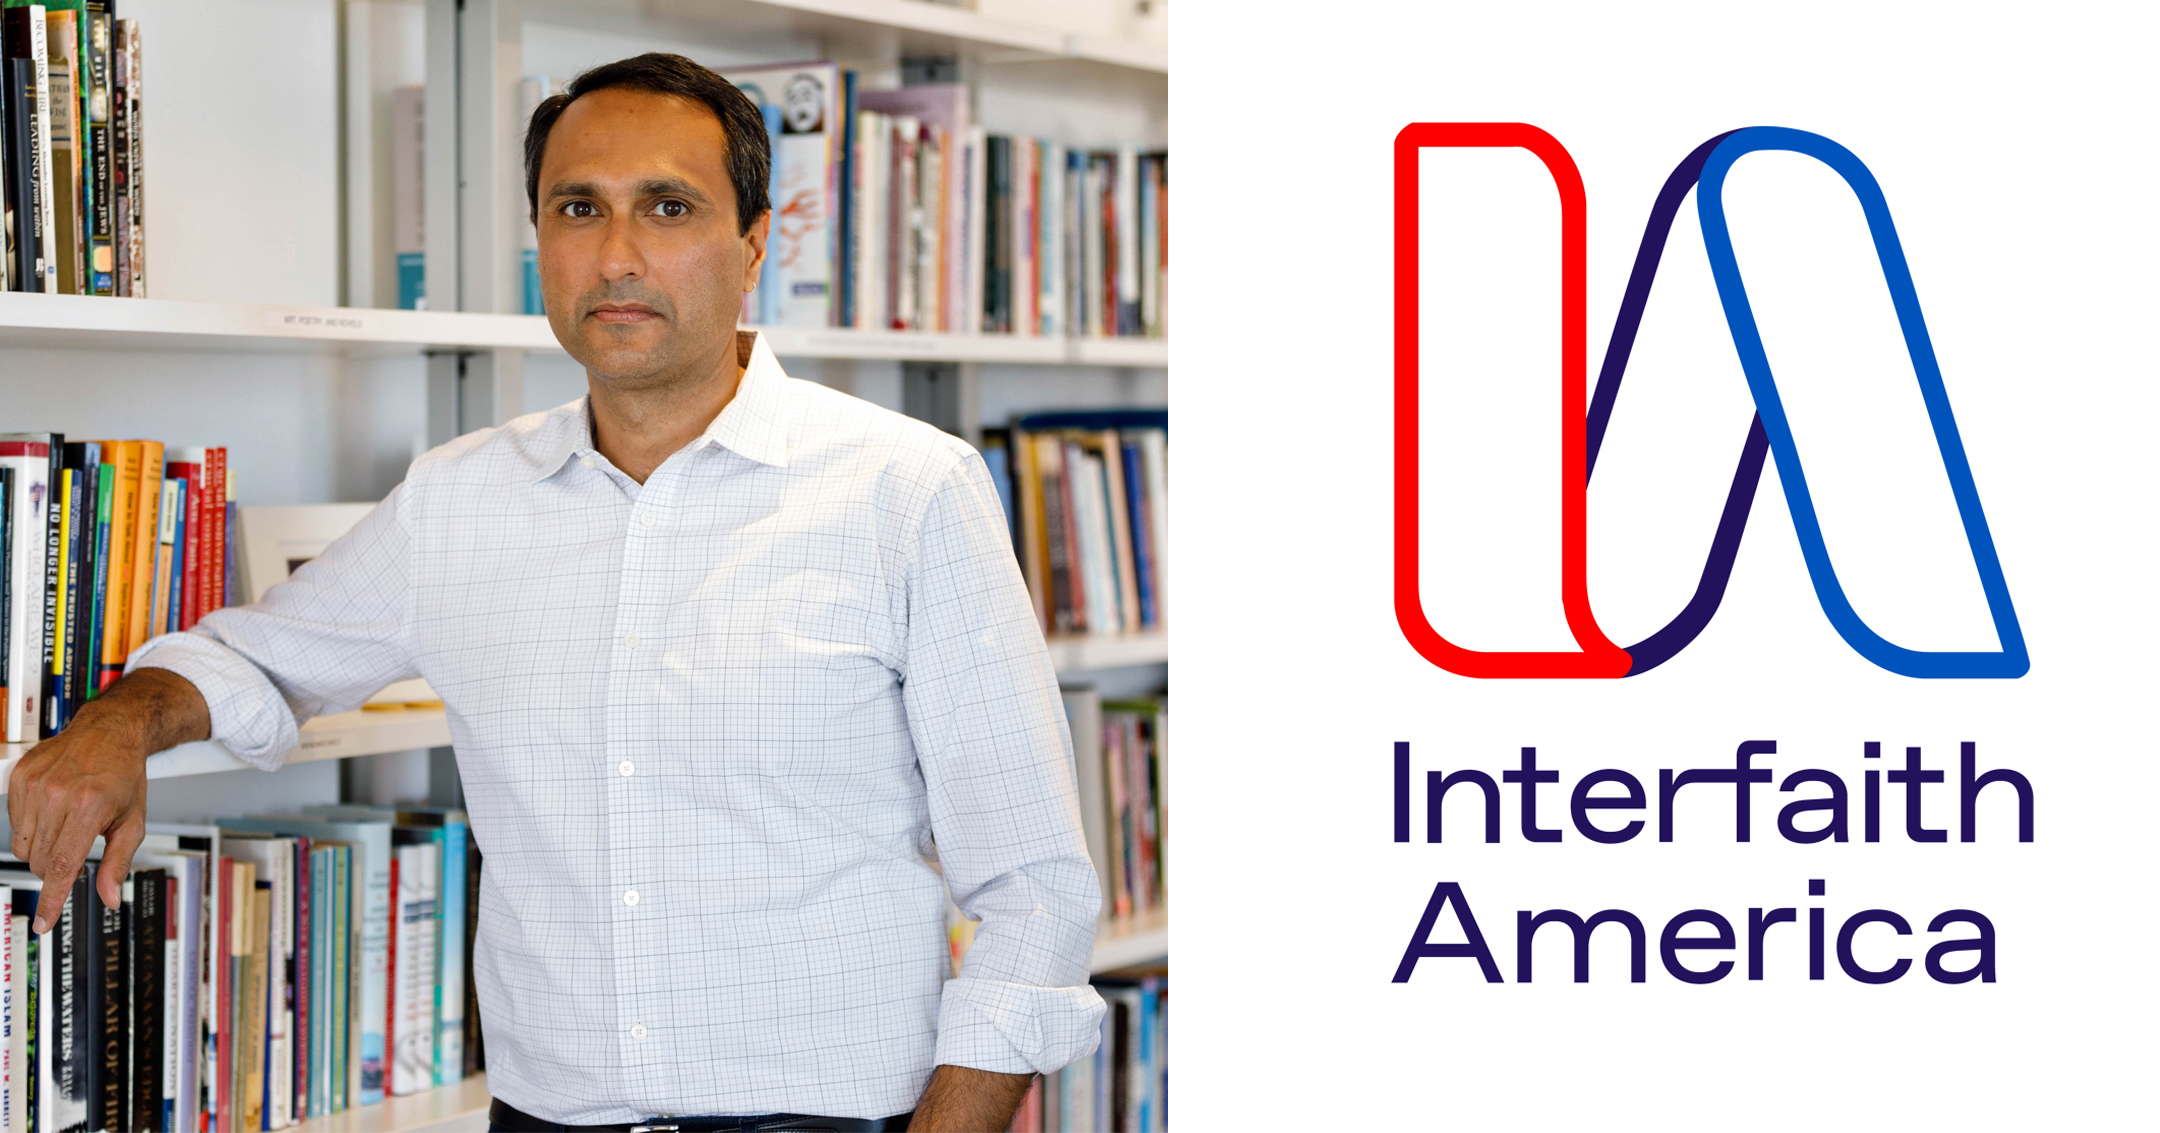 Photo of Eboo Patel standing at a bookcase, left, the logo of Interfaith America, right